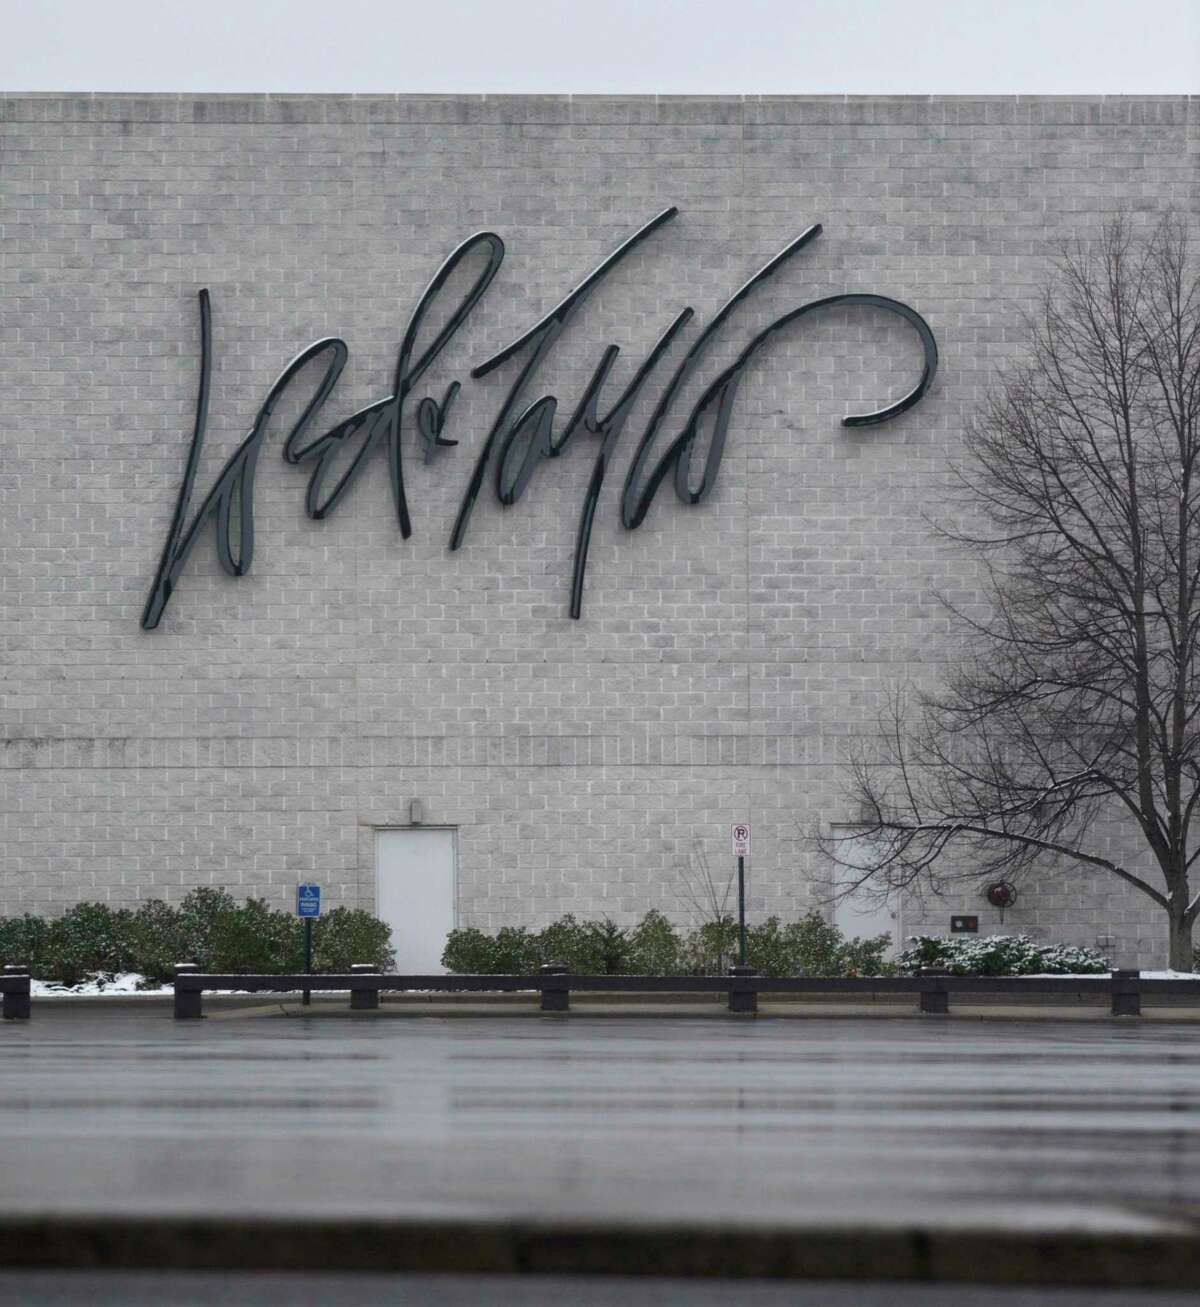 The Lord + Taylor store at the Danbury Fair mall in Danbury, Conn., is one of 19 locations that the bankrupt Lord + Taylor plans to close.